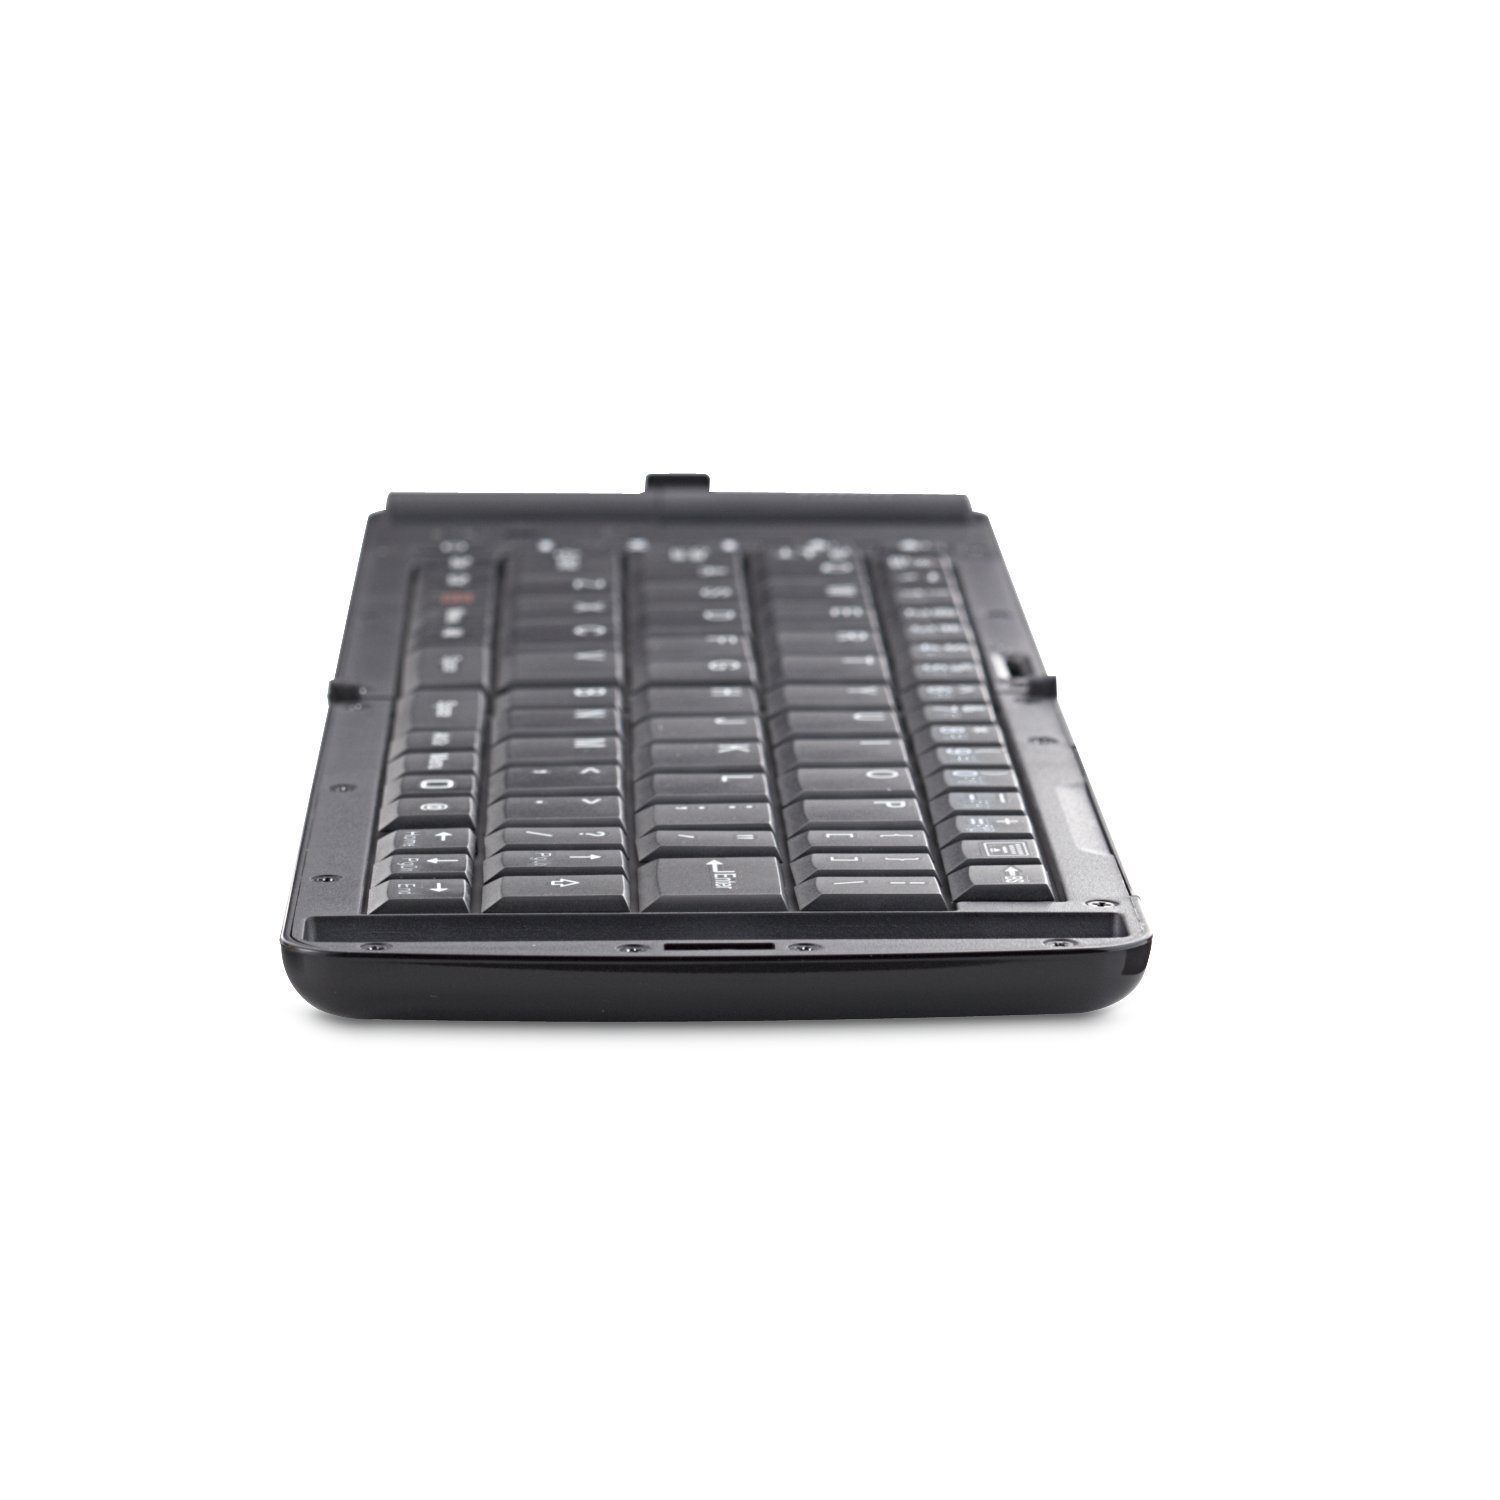 http://thetechjournal.com/wp-content/uploads/images/1110/1319474214-verbatim-97537-wireless-bluetooth-mobile-keyboard-for-all-ios-devices-and-other-tablets-4.jpg